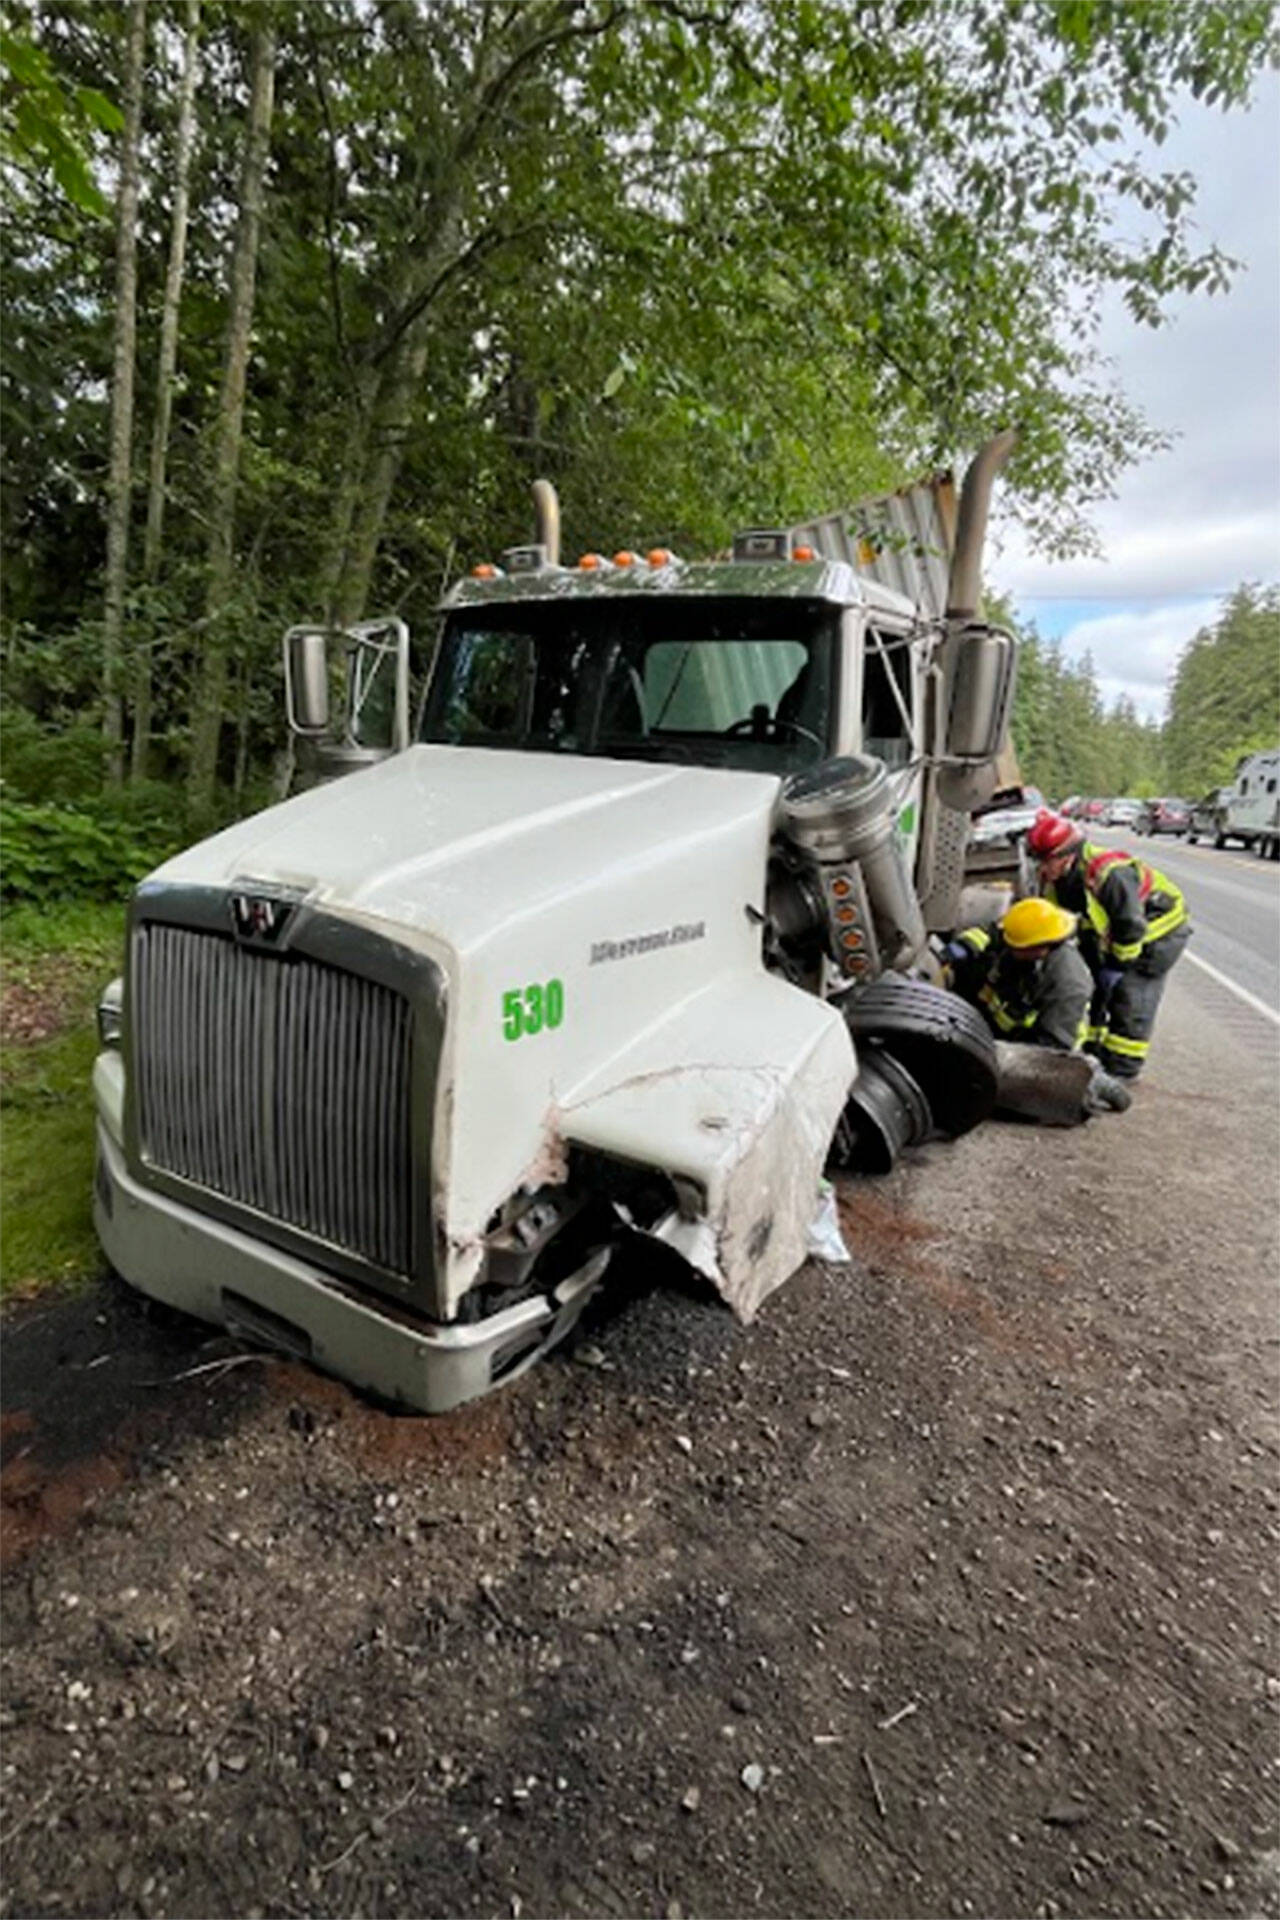 Three people were transported to hospitals for injuries on Monday after a collision on U.S. Highway 101 that involved two SUVs and a semi-truck. (Clallam County Fire District 3)